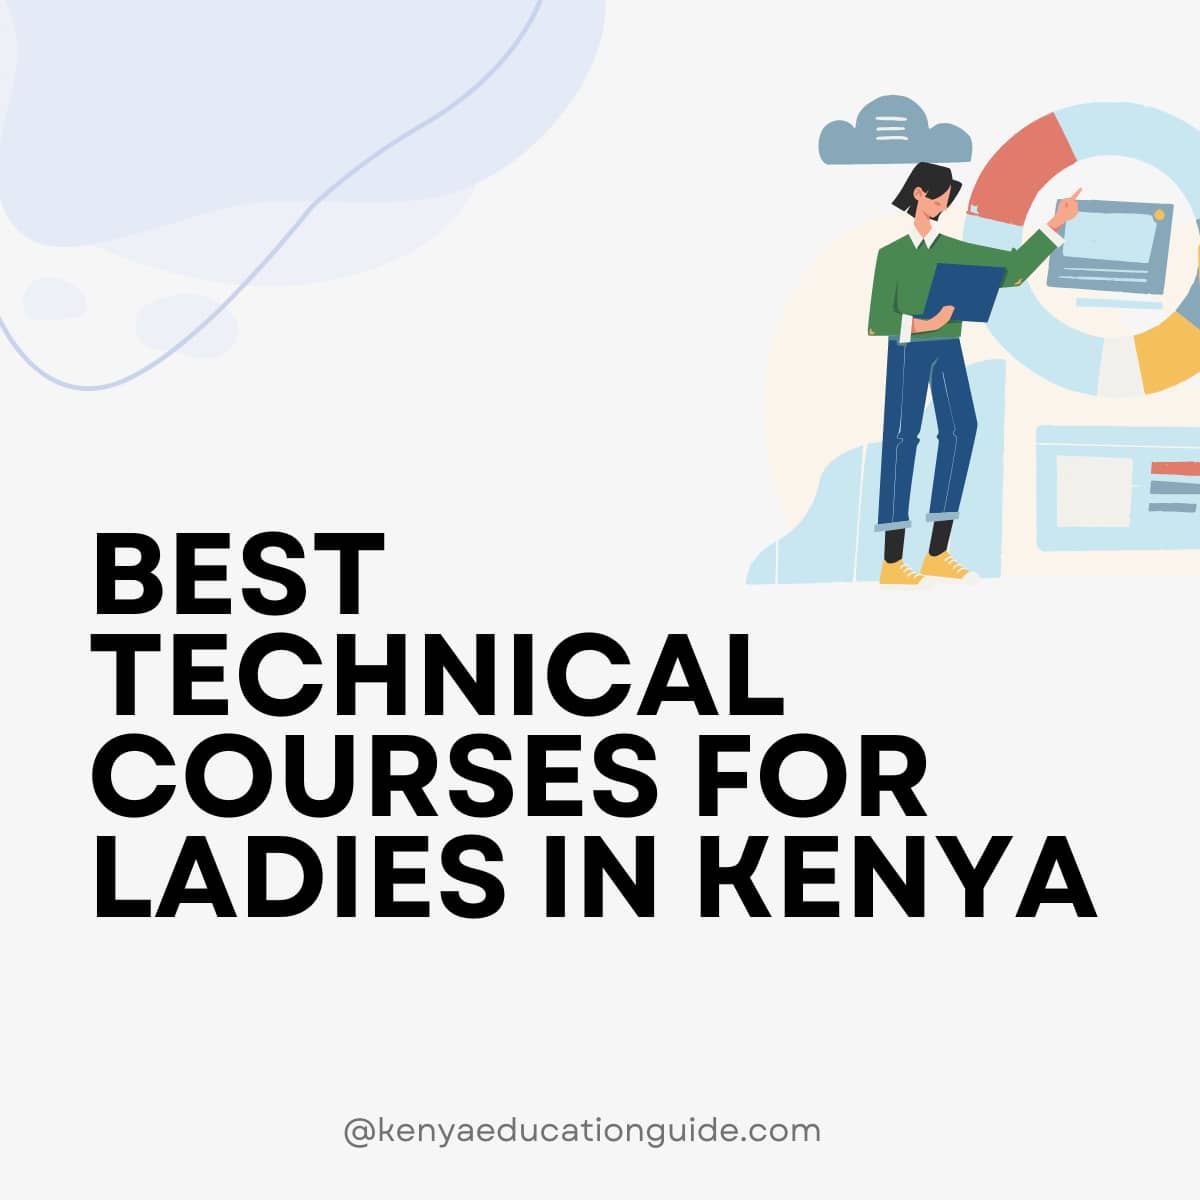 Best Technical Courses for Ladies in Kenya